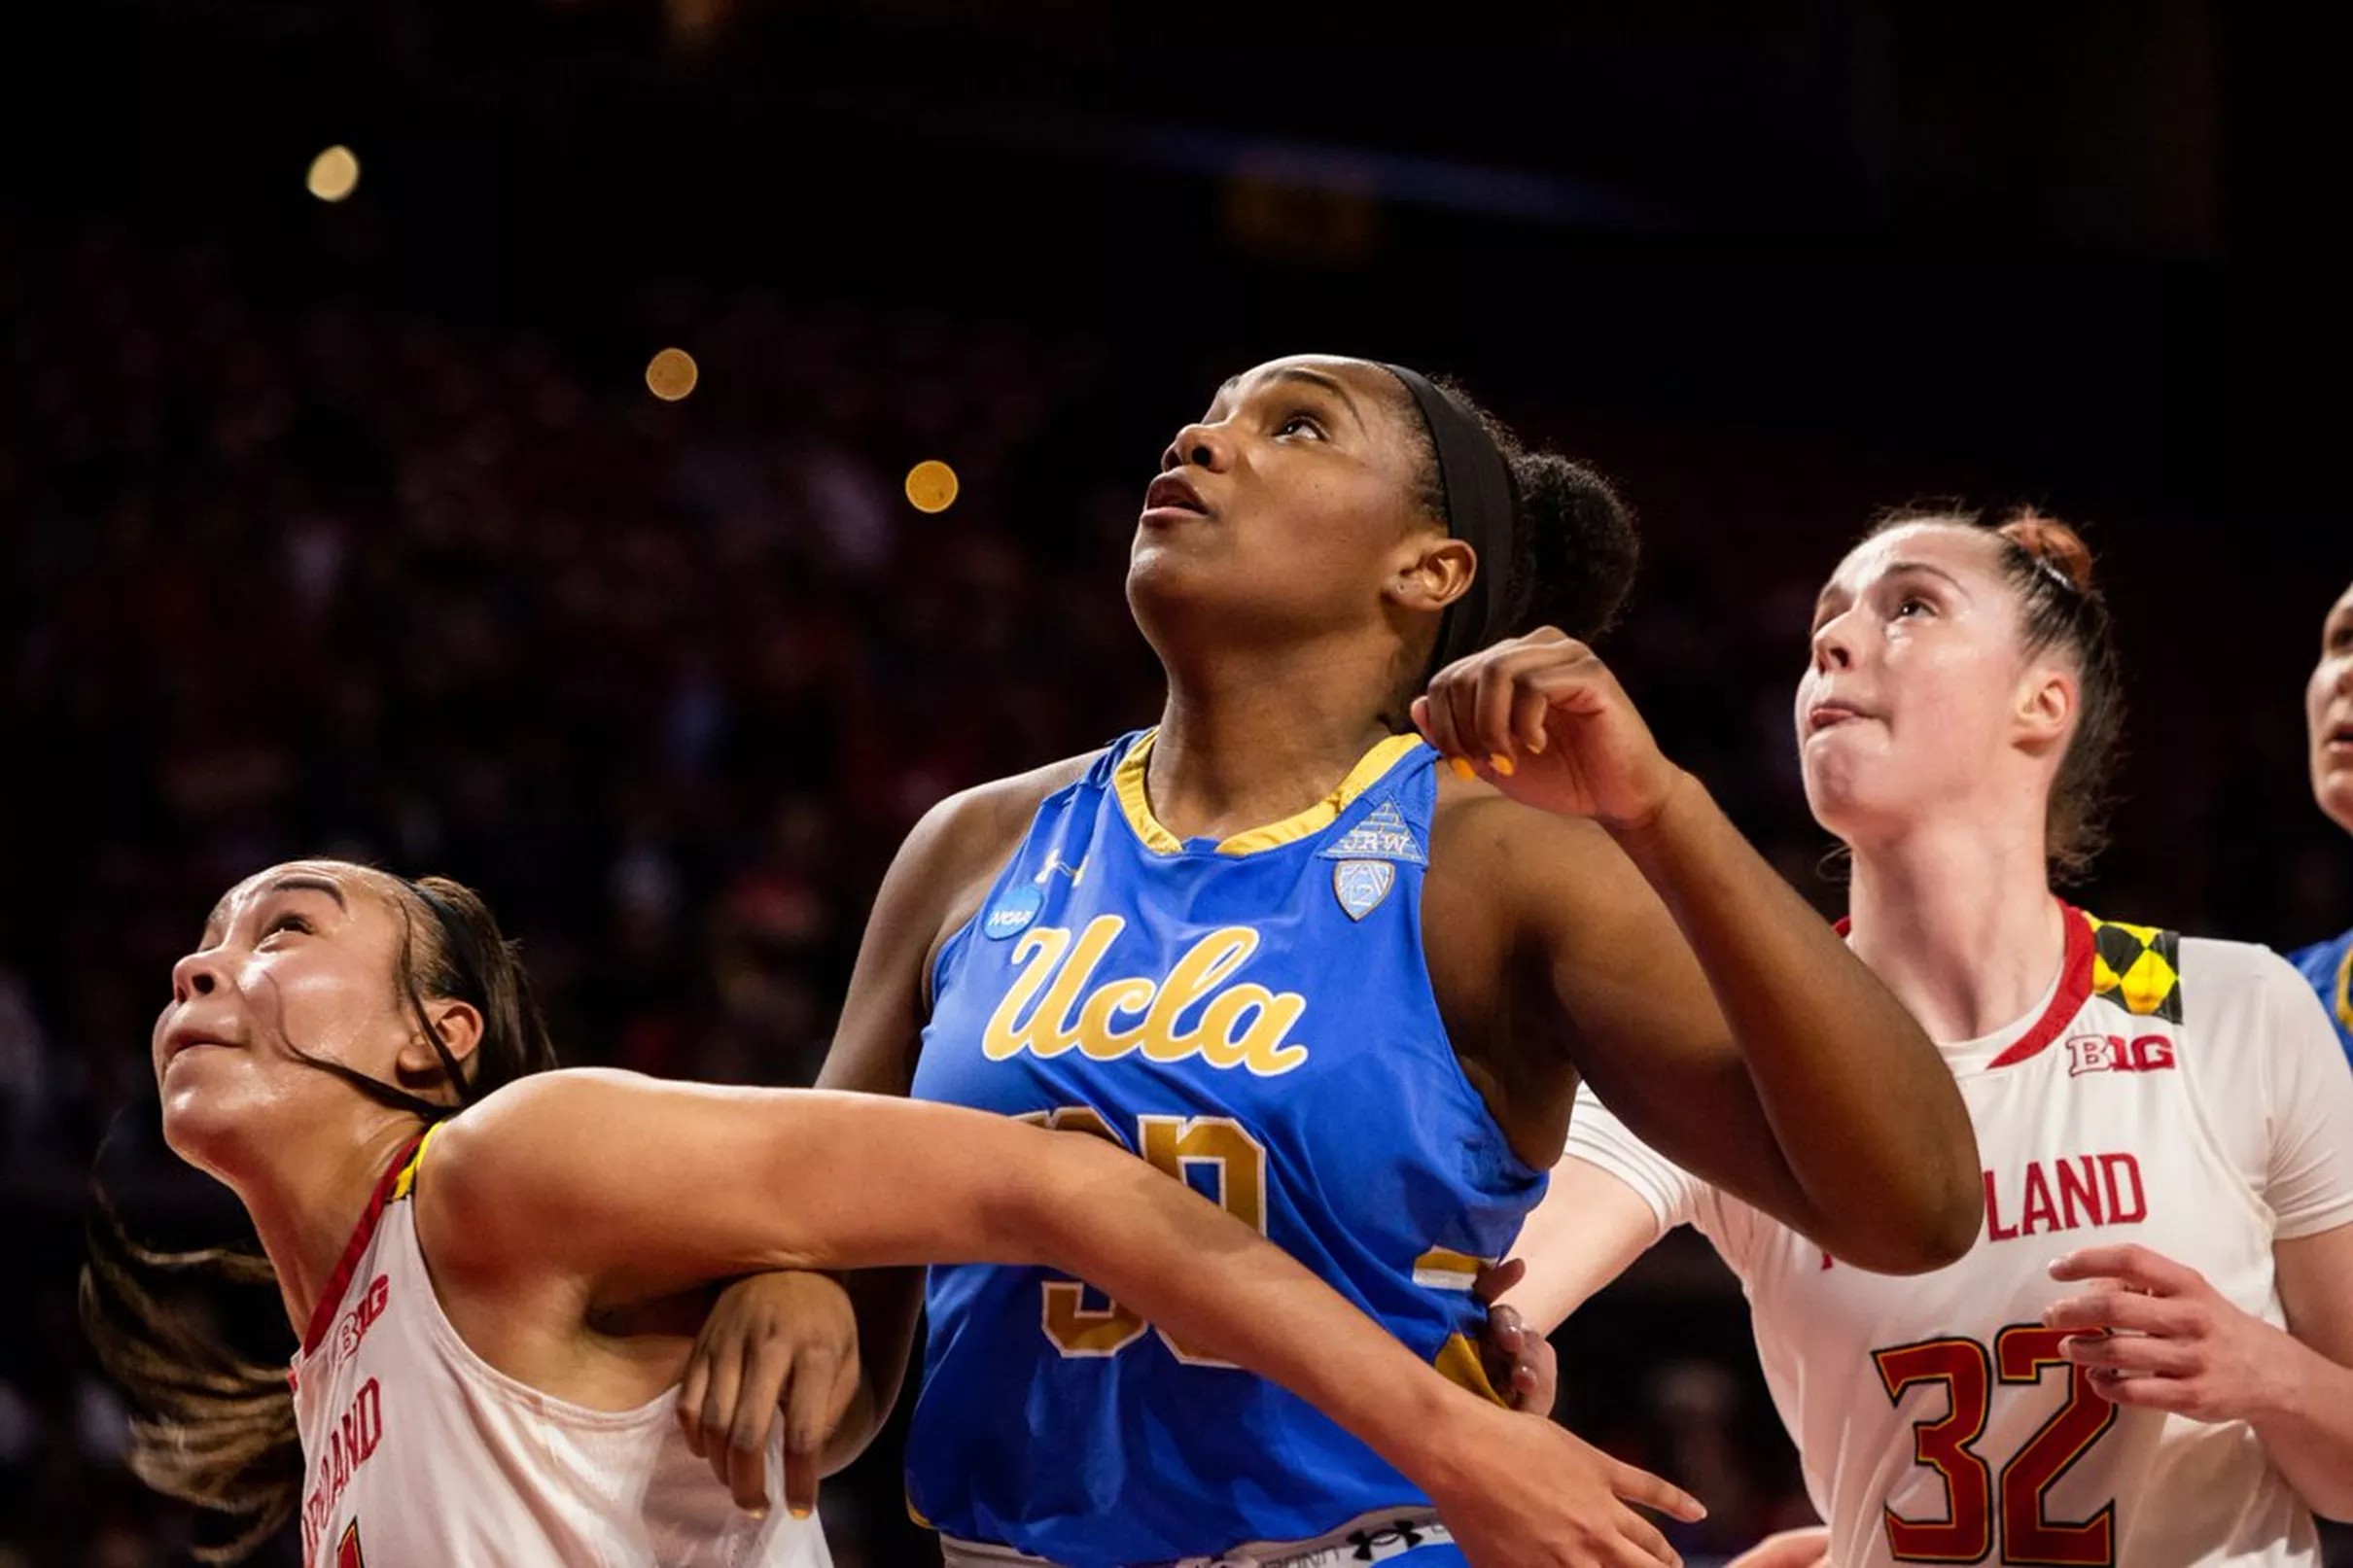 How Sweet It Is! UCLA Shows Their Hearts, Beats Maryland, 8580, to